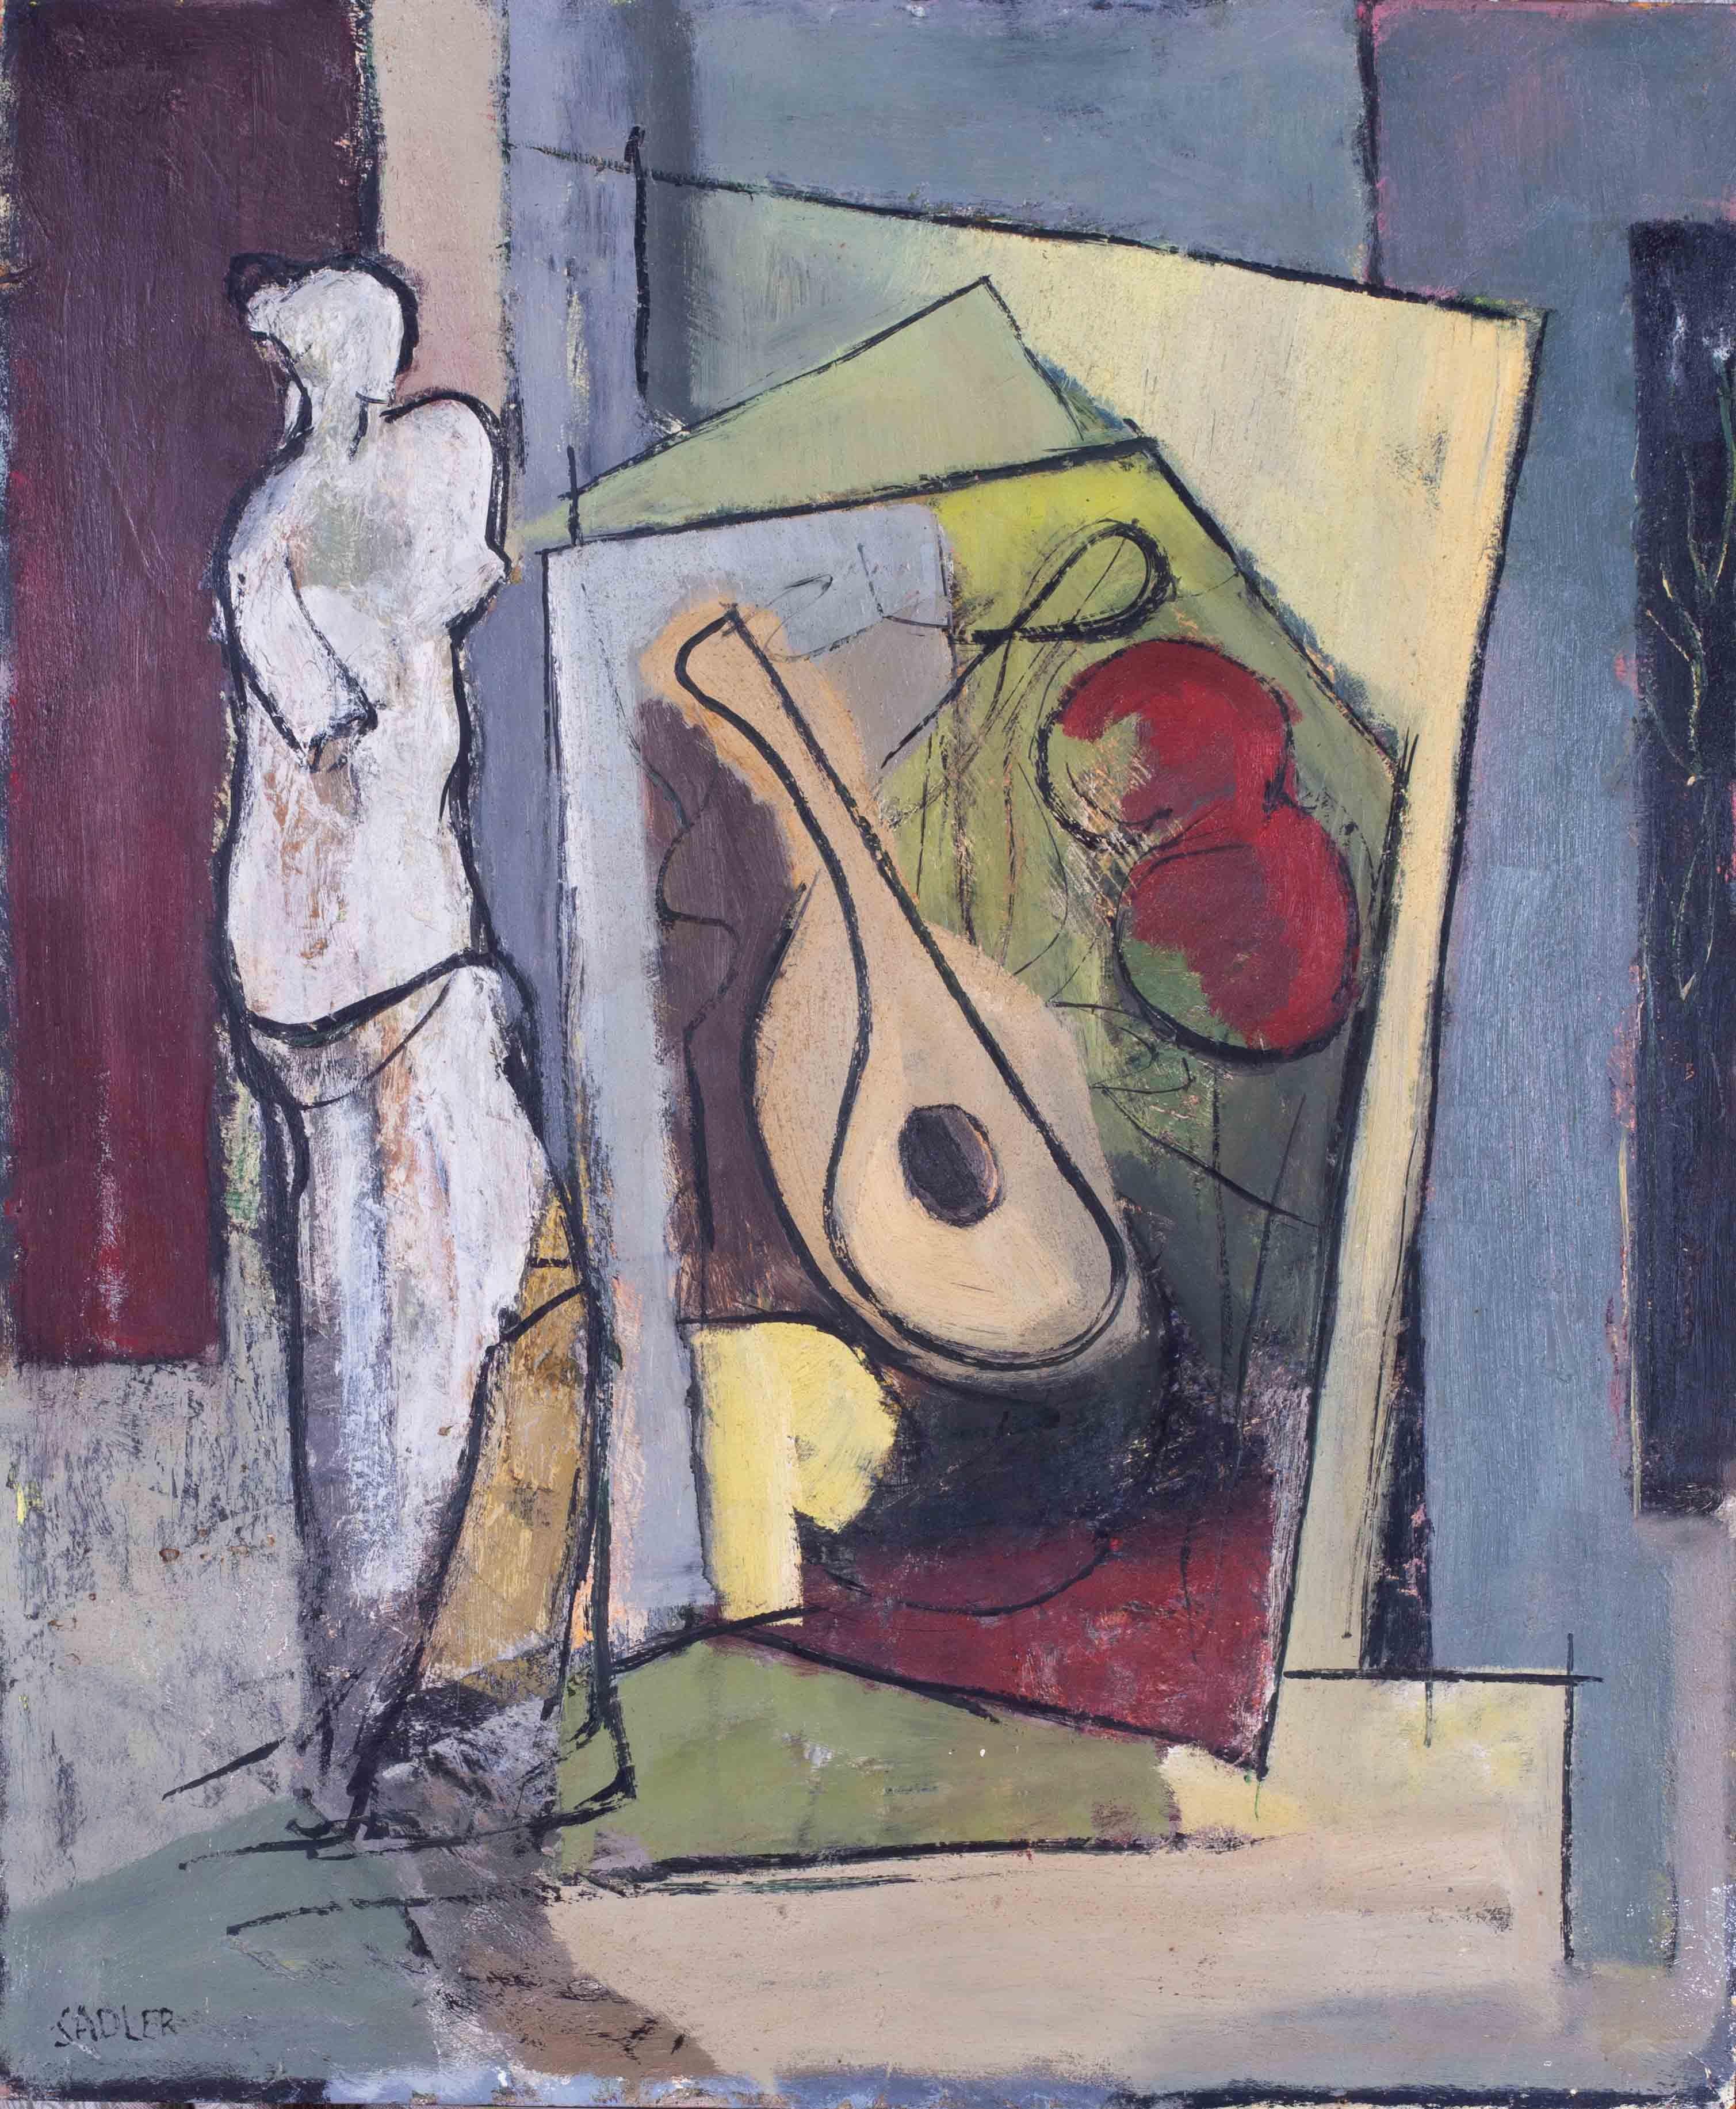 A very attractive cubist still life with statue and guitar by Modern British artist Robert Sadler.

The details of the work are as follows: 

Robert Sadler (British, 1909 – 2001)
Venus de Milo and guitar, circa 1960
Oil on board
Signed ‘SADLER’